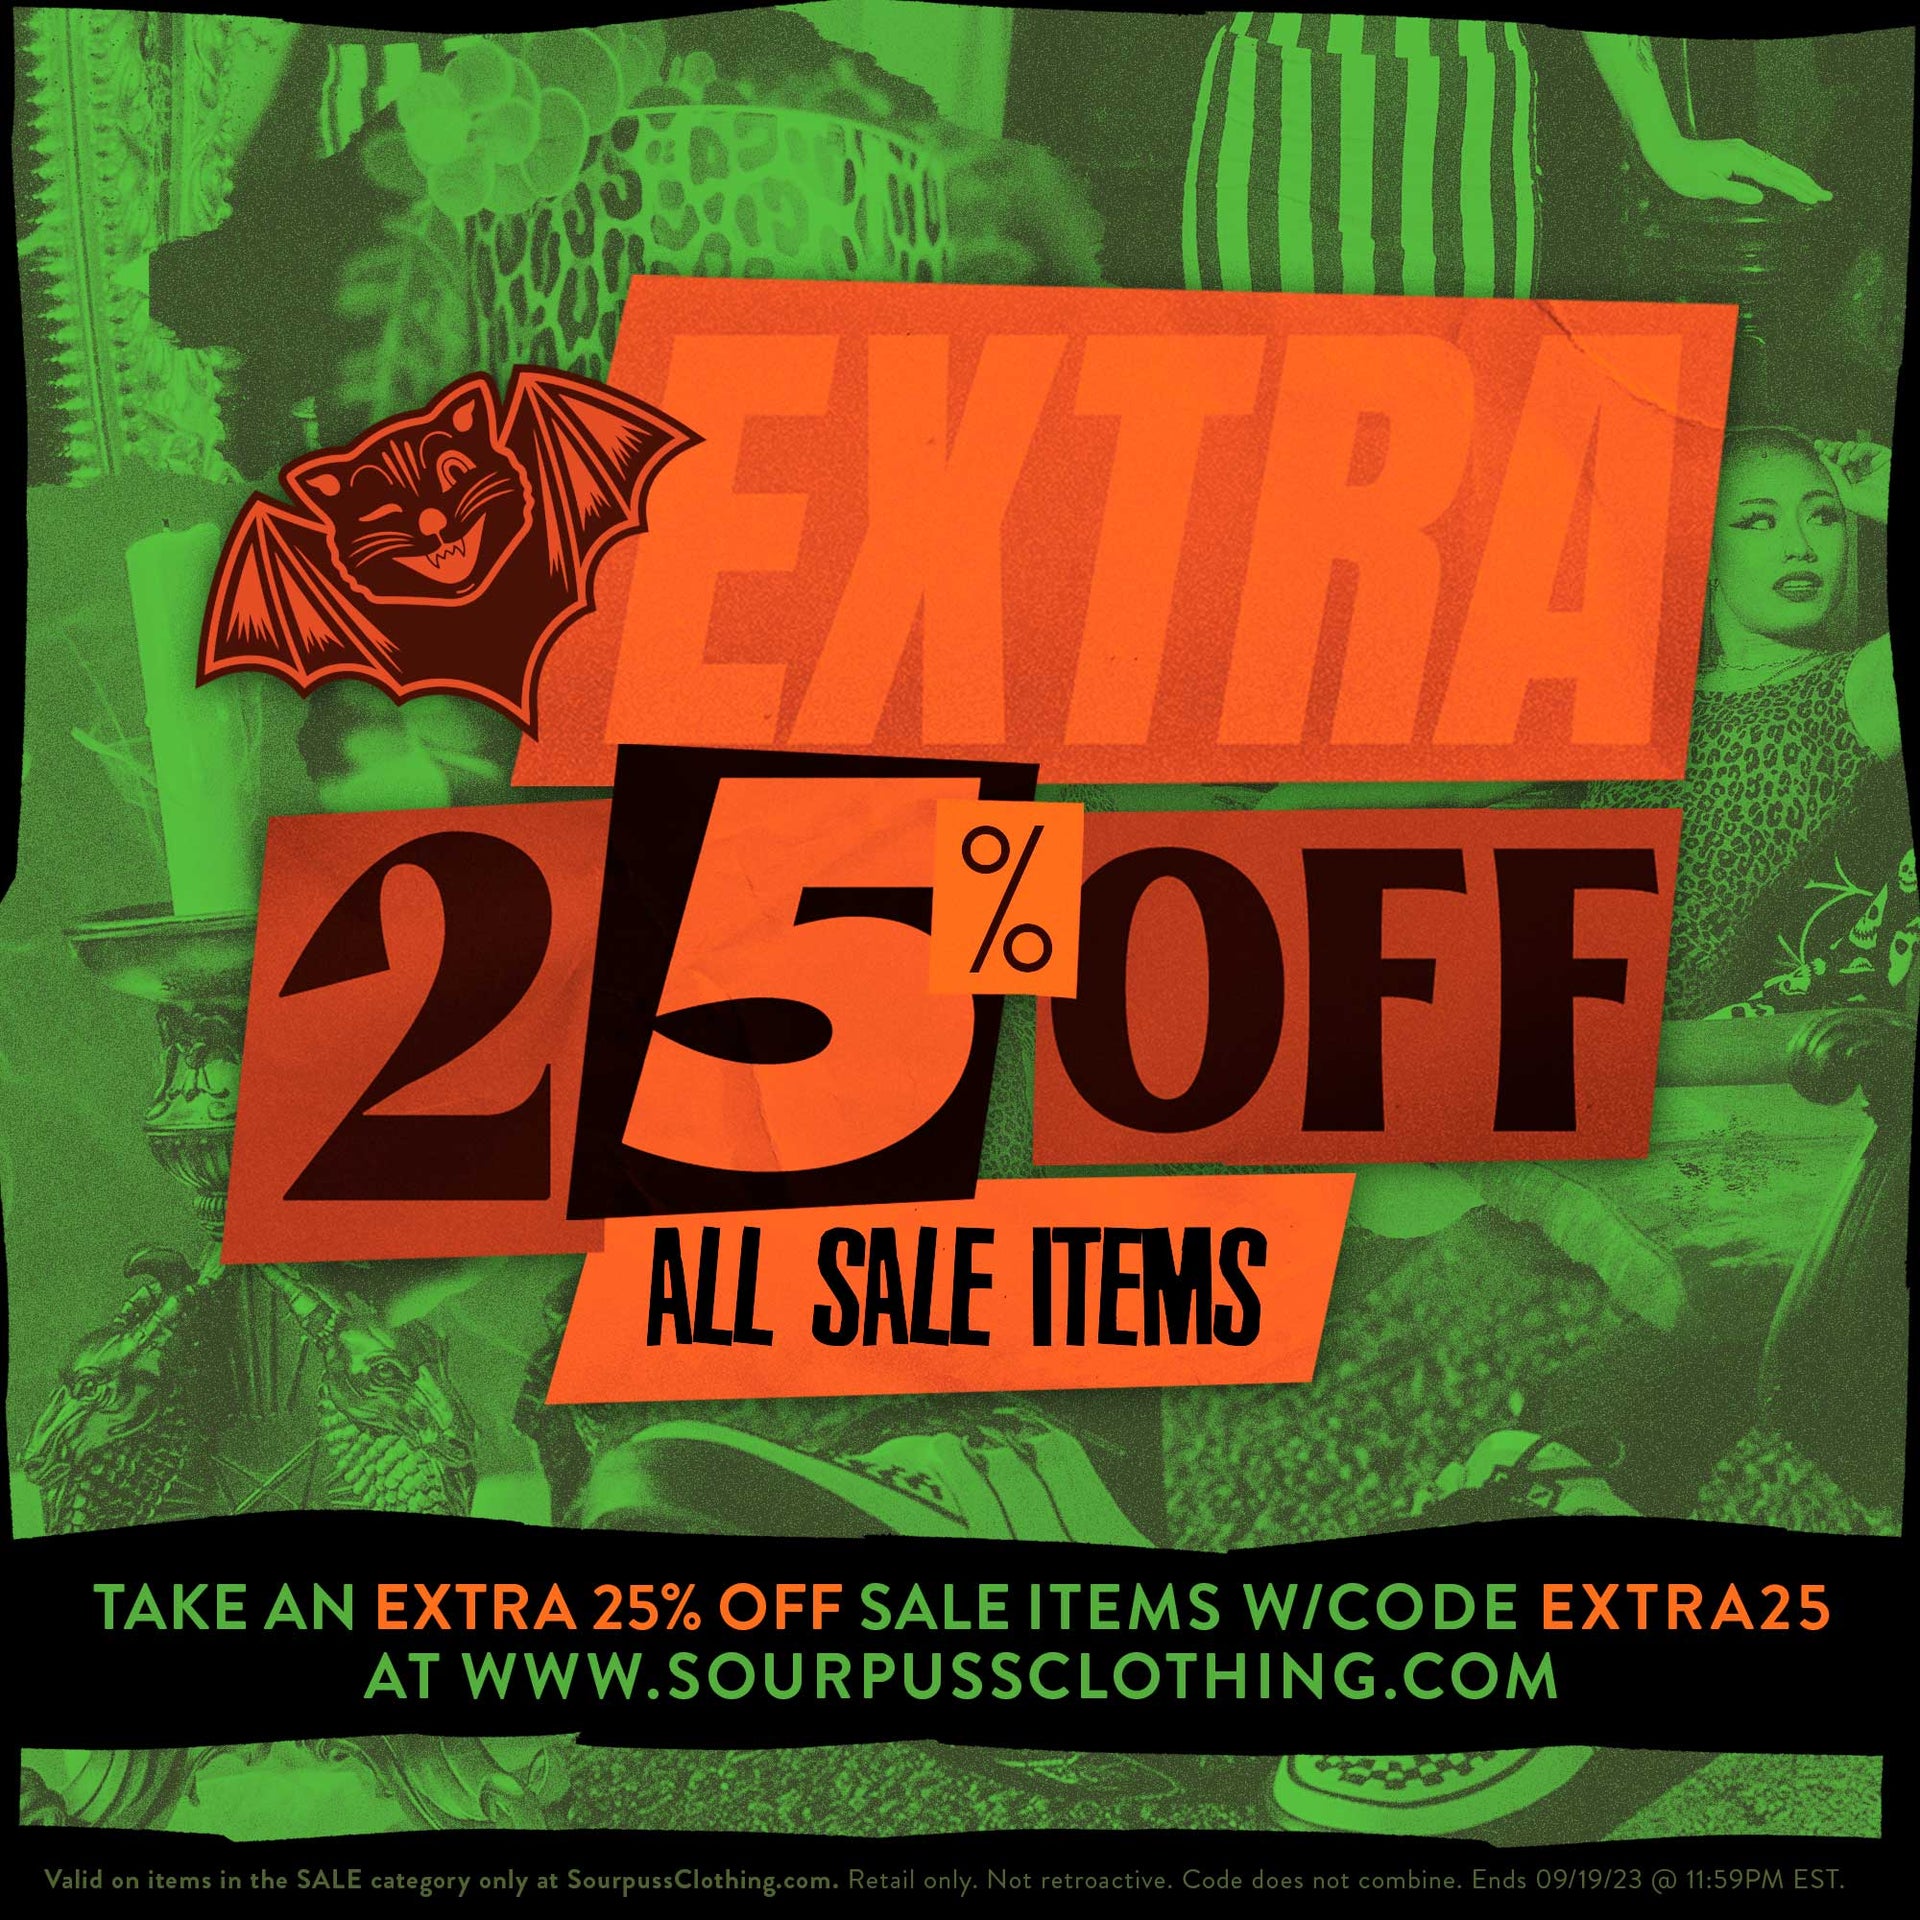 🖤🧡 EXTRA EXTRA! SALE ON SALE IS BACK! 🧡🖤